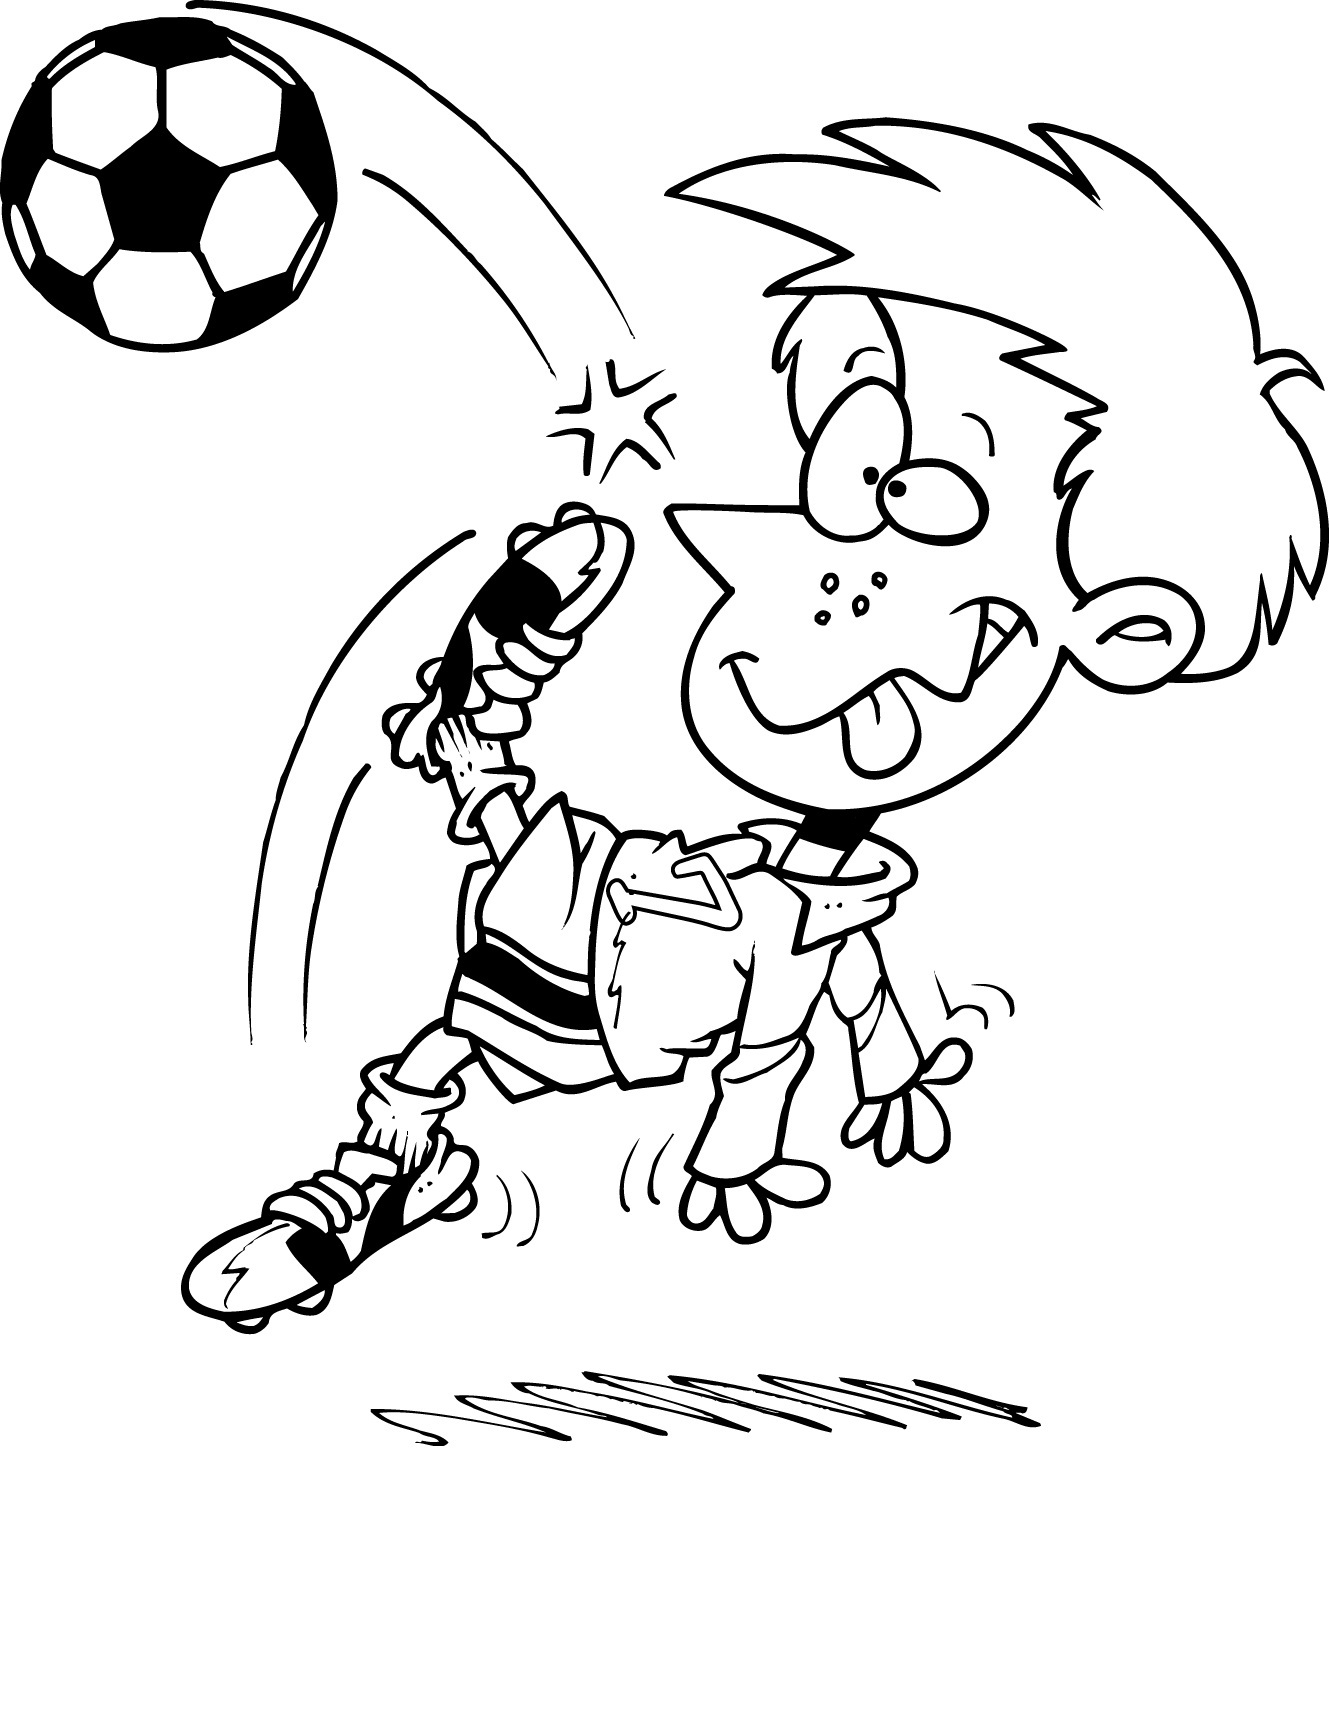 coloring-pages-free-printable-soccer-coloring-for-kids